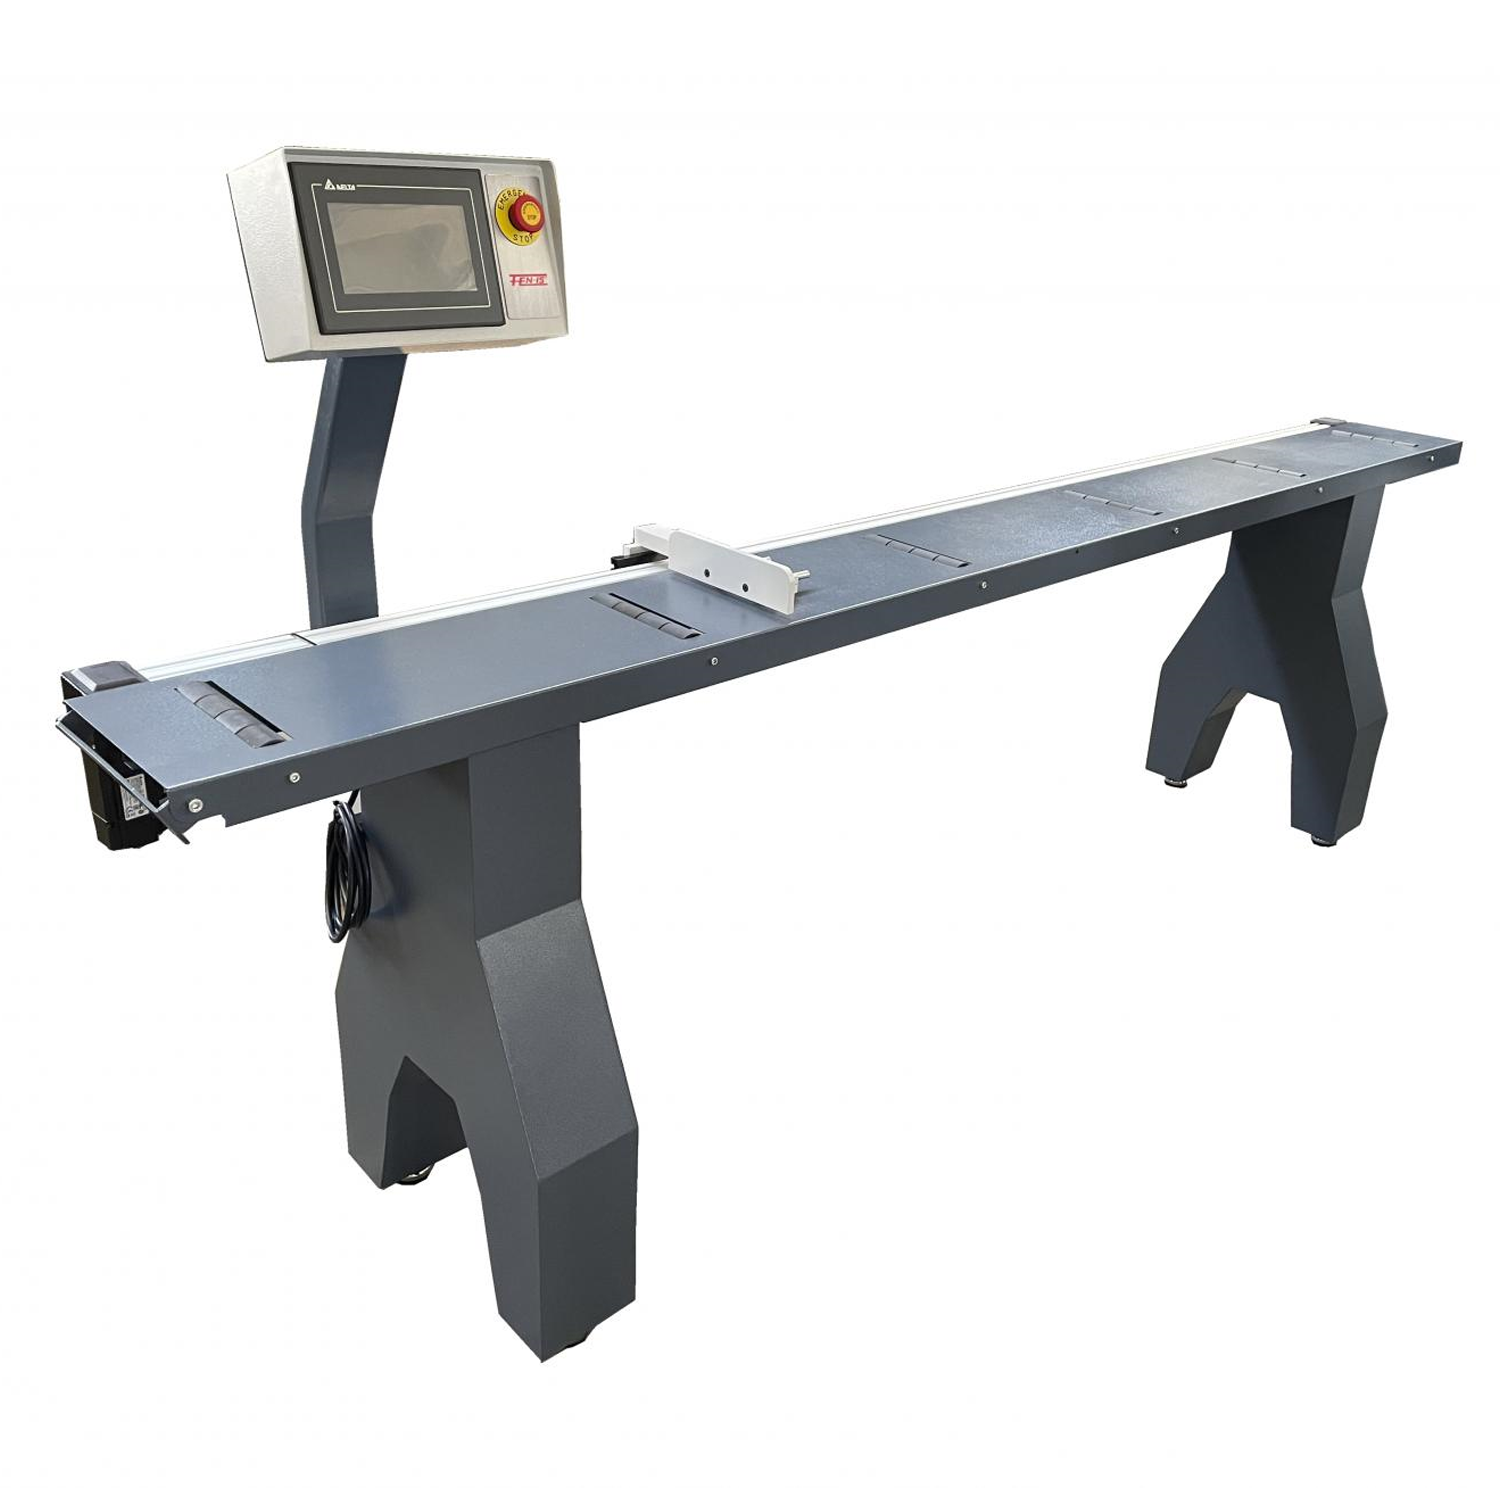 CNC (Digital) Infeed and Outfeed Conveyer / Length Stop FN3000DK suit Mitre Saws by Fen-Is